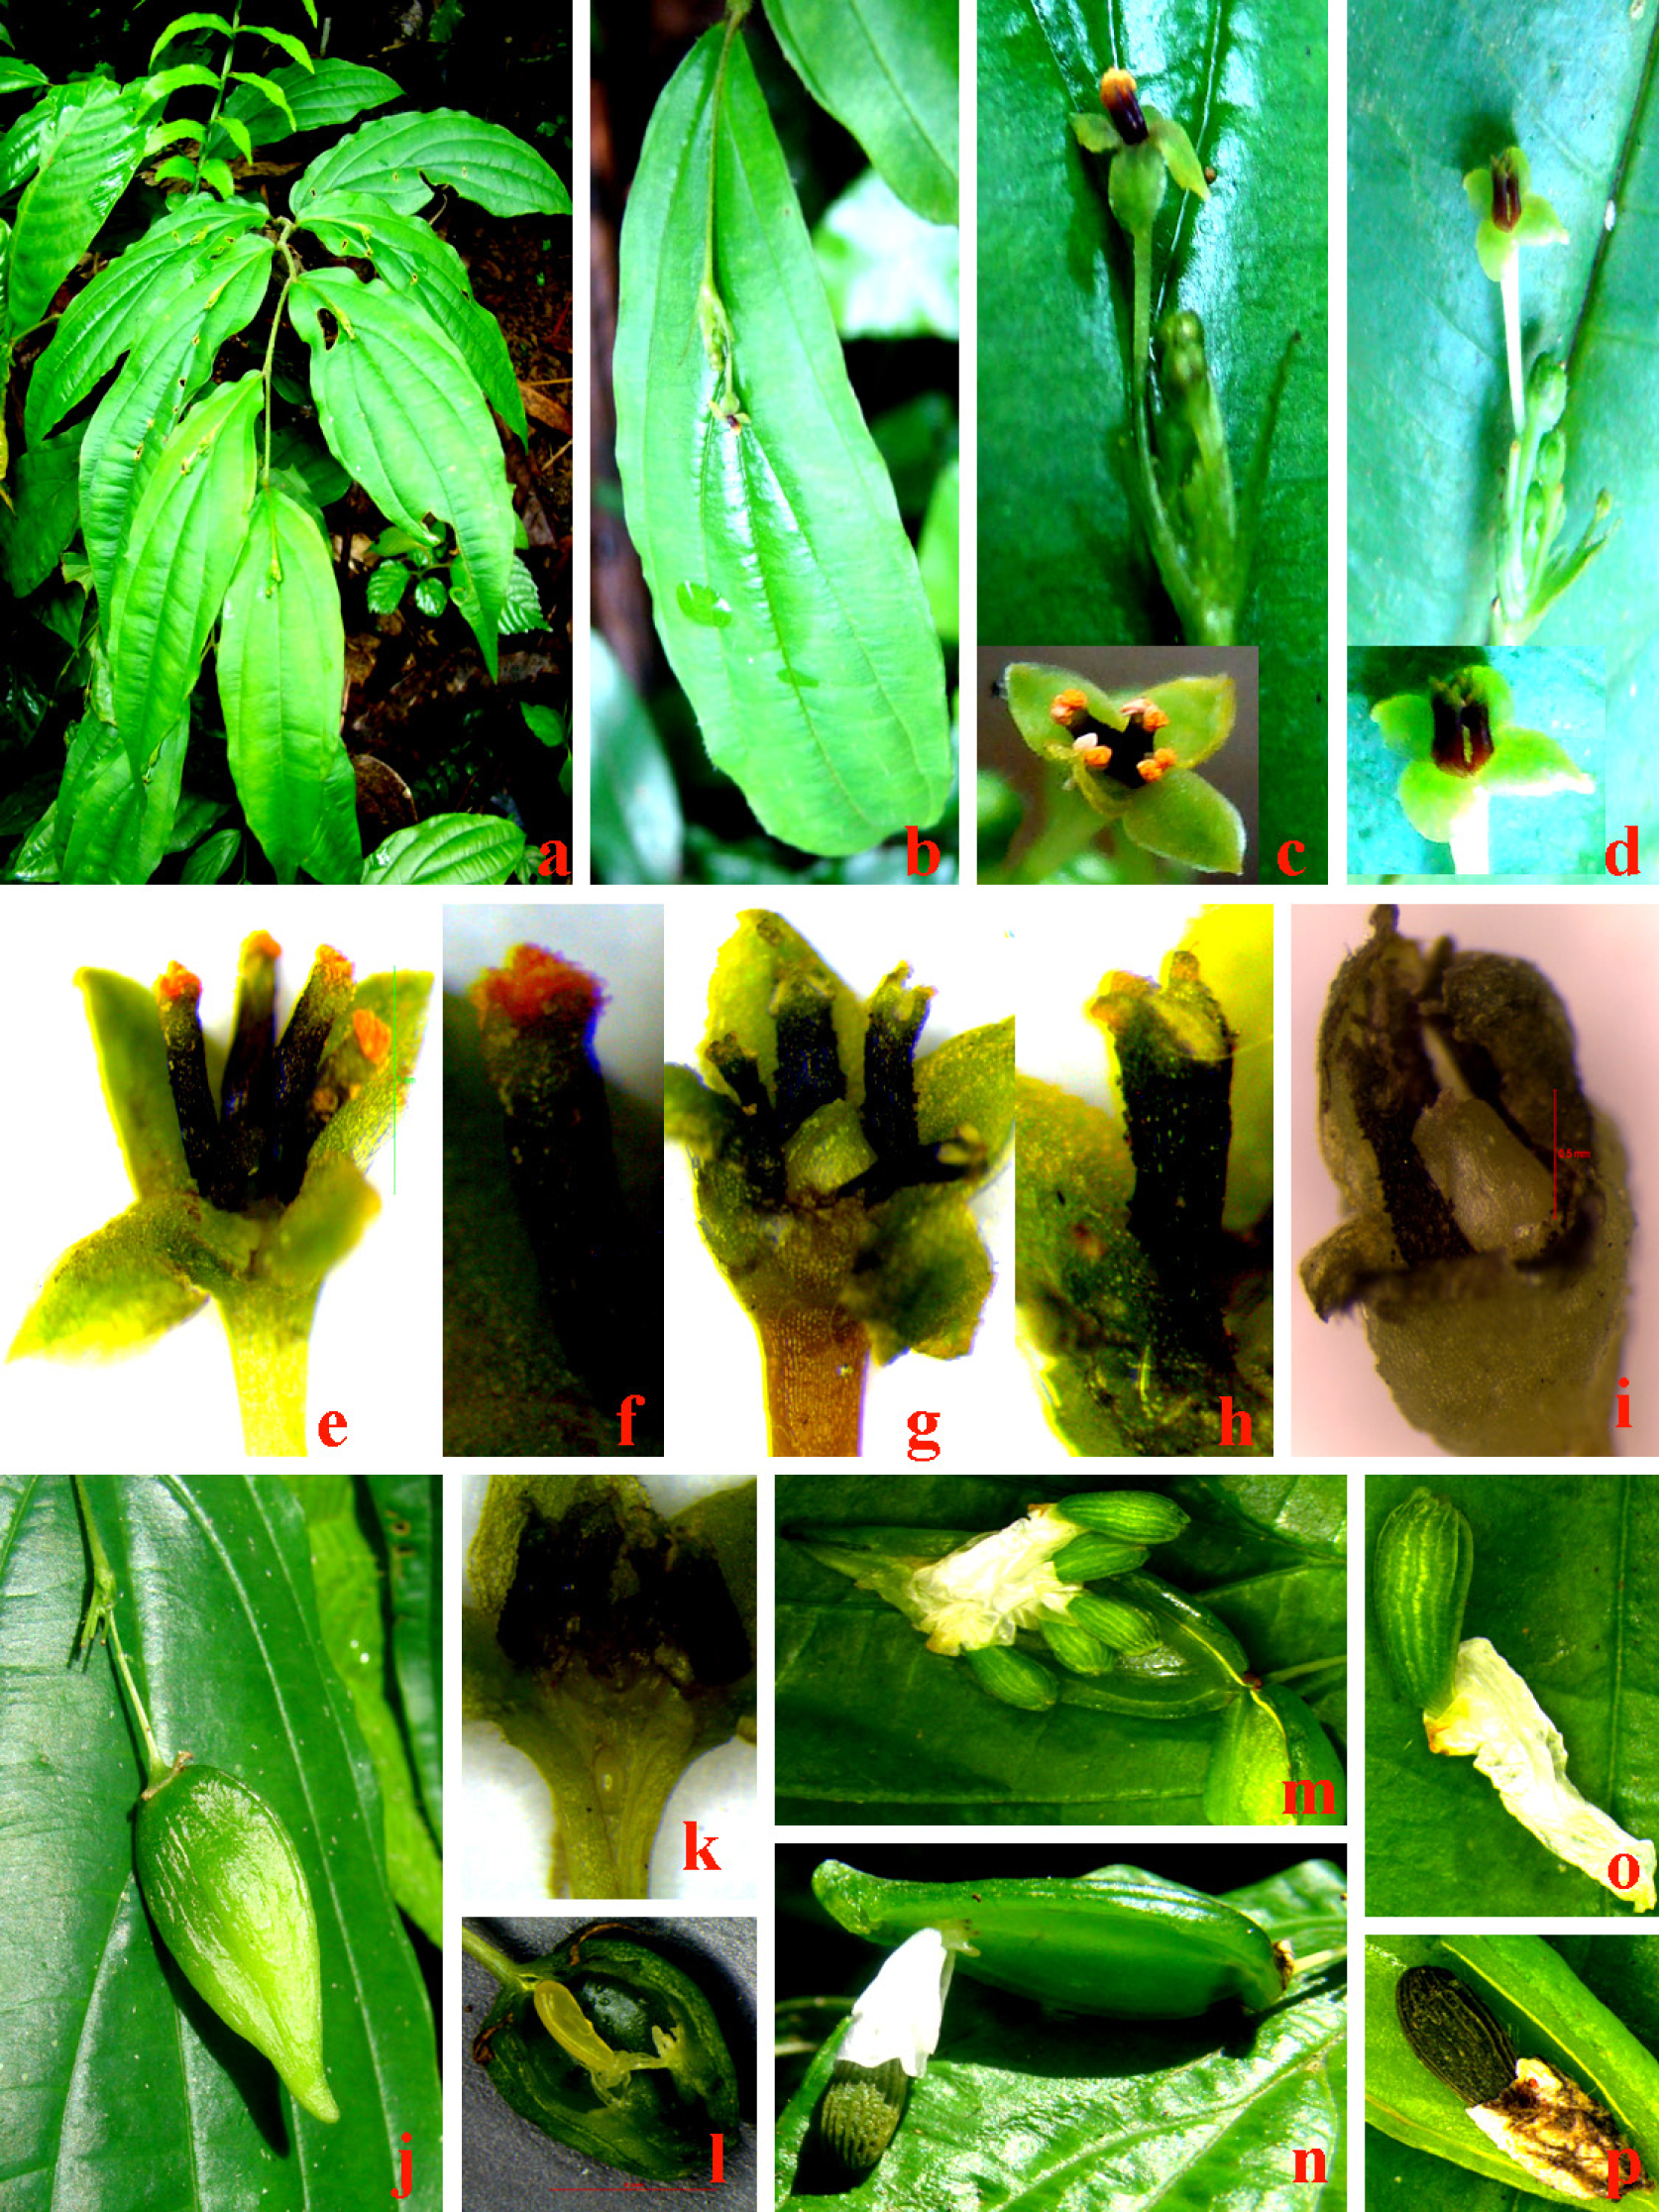 Fig. 1. Stichoneuron membranaceum: a – habit; b – inflorescence along the midrib of the leaf; c – male inflorescence and functional male flower before anther dehiscence (inset); d – hermaphrodite inflorescence and functional female flower (inset); e – male flower after anther dehiscence; f – stamen of the functional male flower; g – functional female flower; h – stamen of the functional female flower; i – ovary; j – mature fruit; k – ovule; l – immature seed; m – 5-seeded capsule; n – single-seeded capsule; o – seed with papery aril; p – mature seed. See text for sizes.